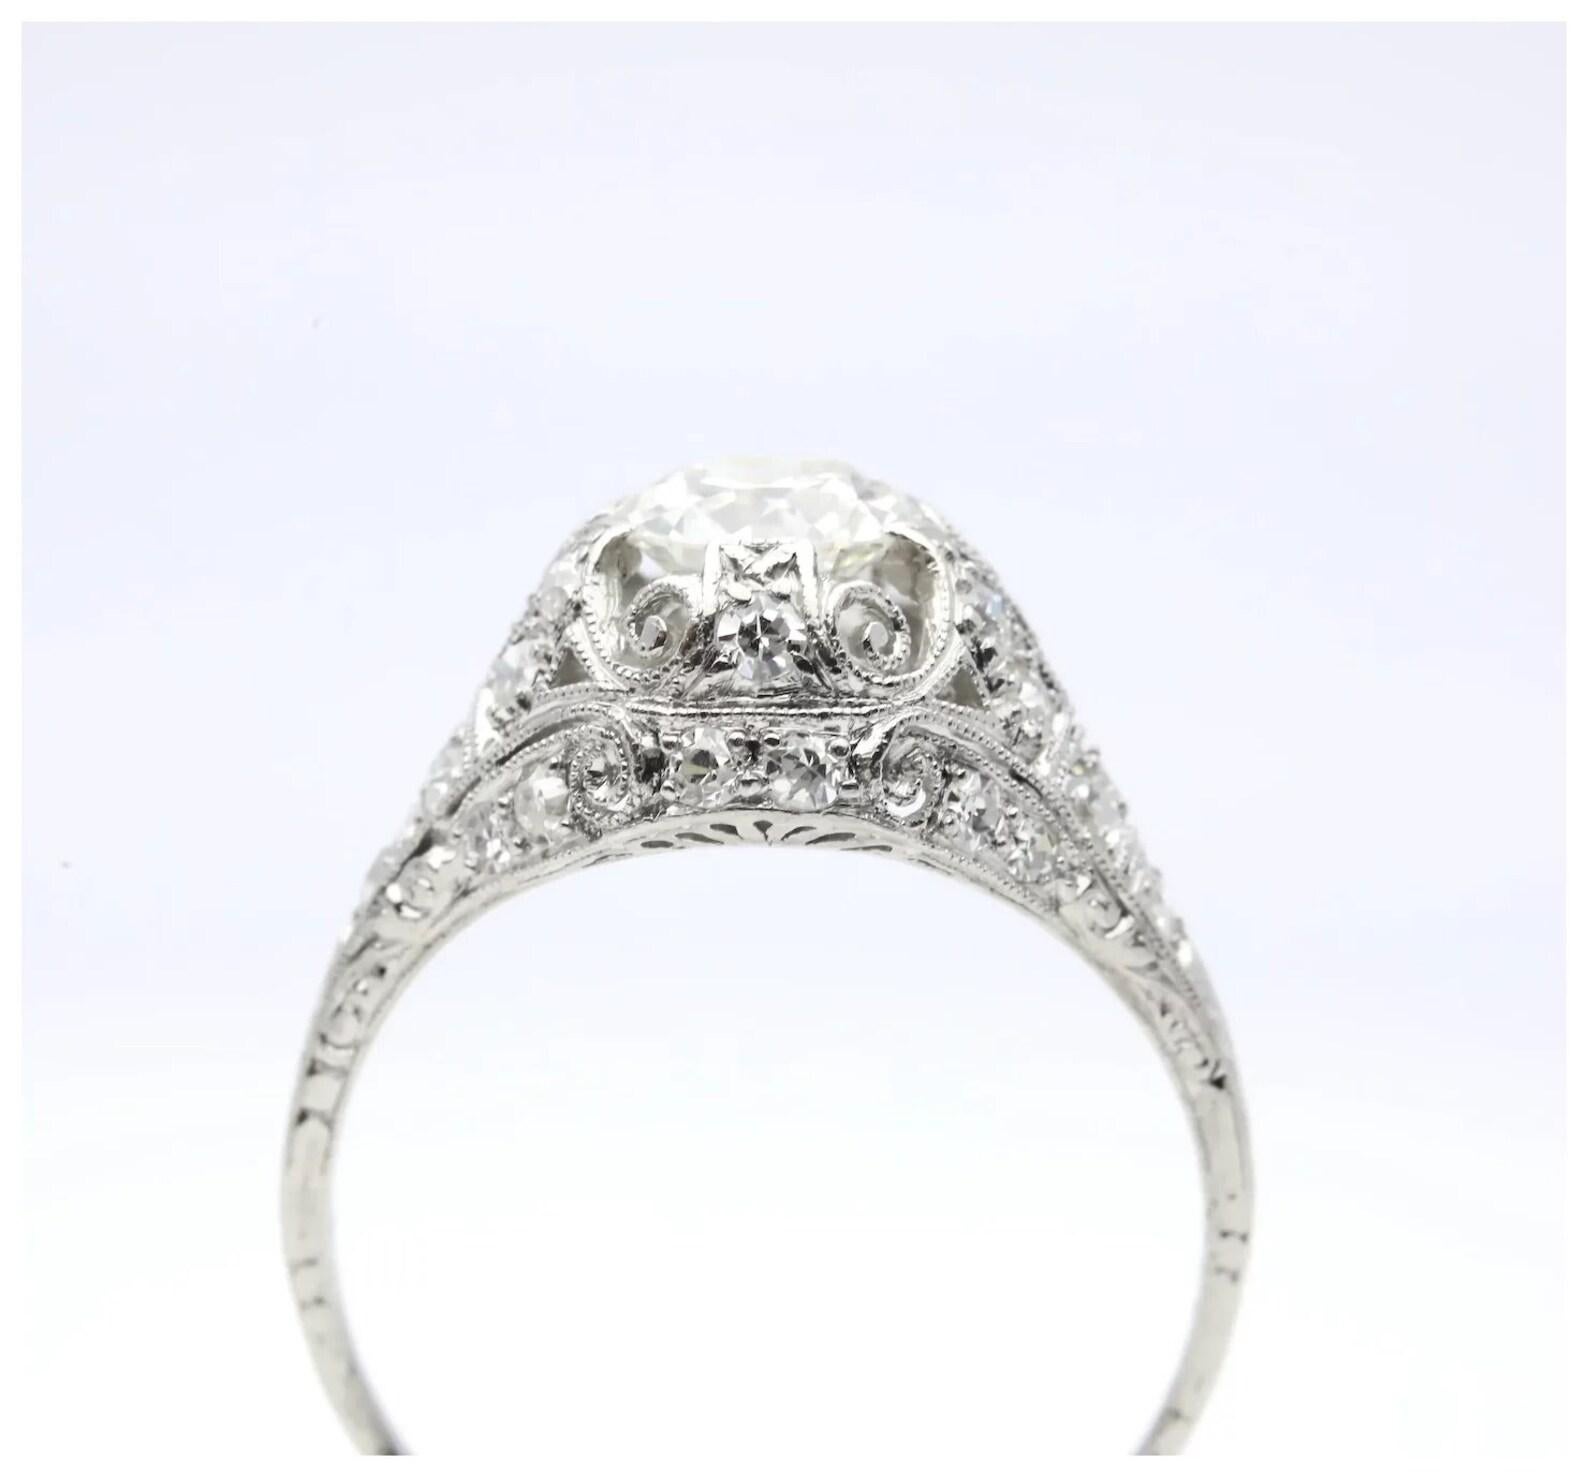 Edwardian 1.41ctw Diamond Engagement Ring in Platinum In Good Condition For Sale In Boston, MA